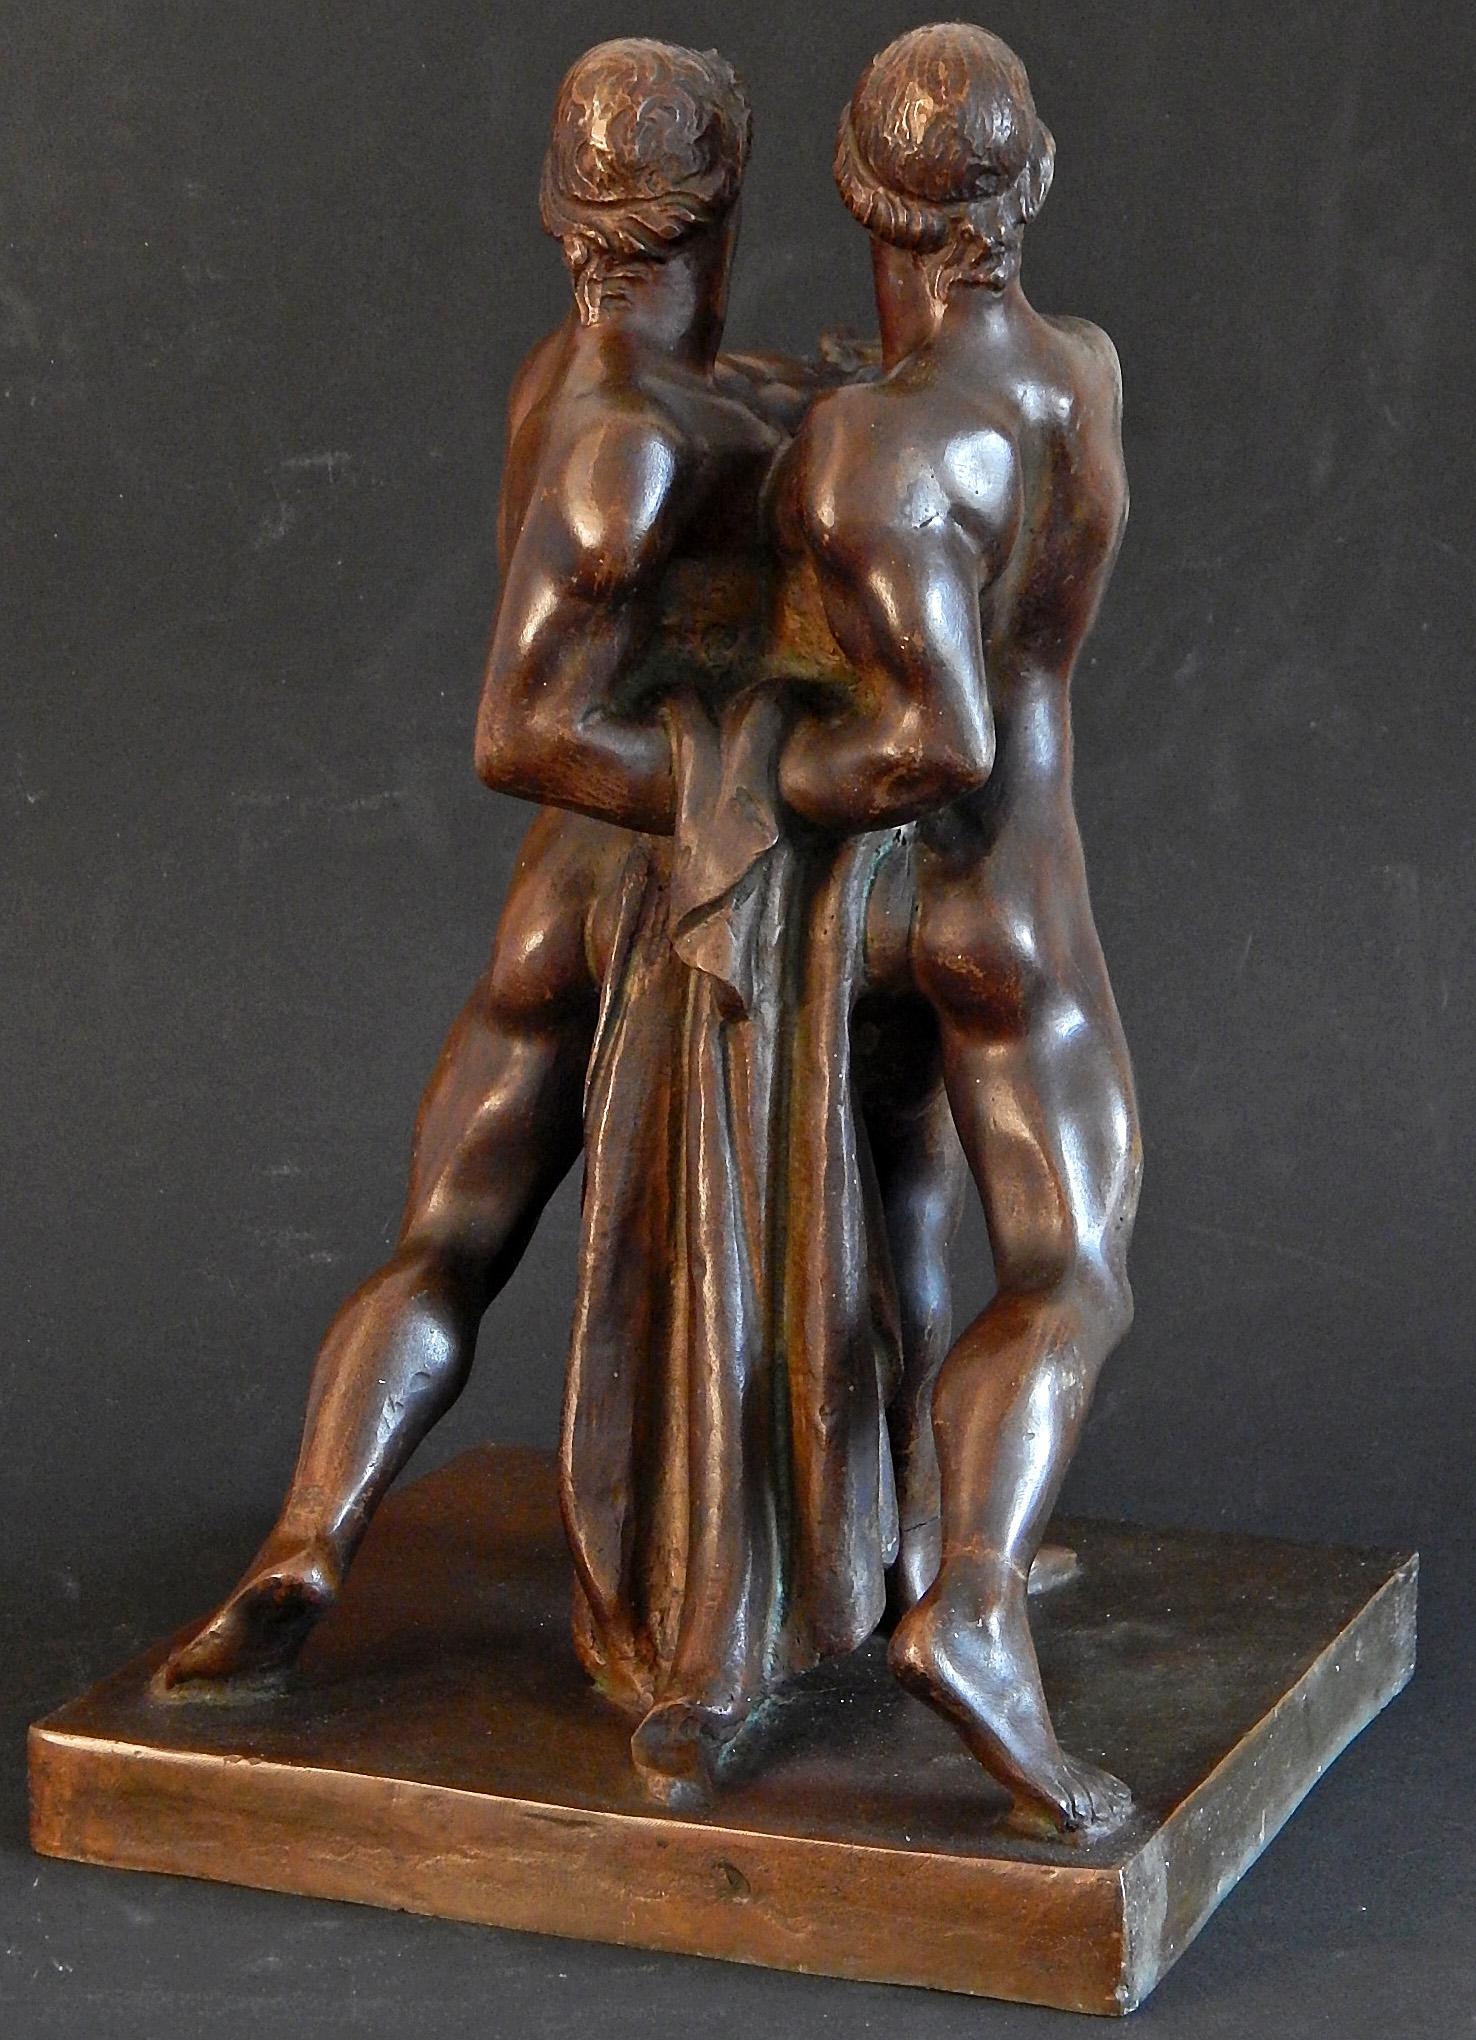 Quite extraordinary, this bronze depicting two nude athletes side by side, their arms out streched in common cause, was sculpted by an Italian artist in the 1930s, perhaps in connection to the construction of what is now known as Foro Italico